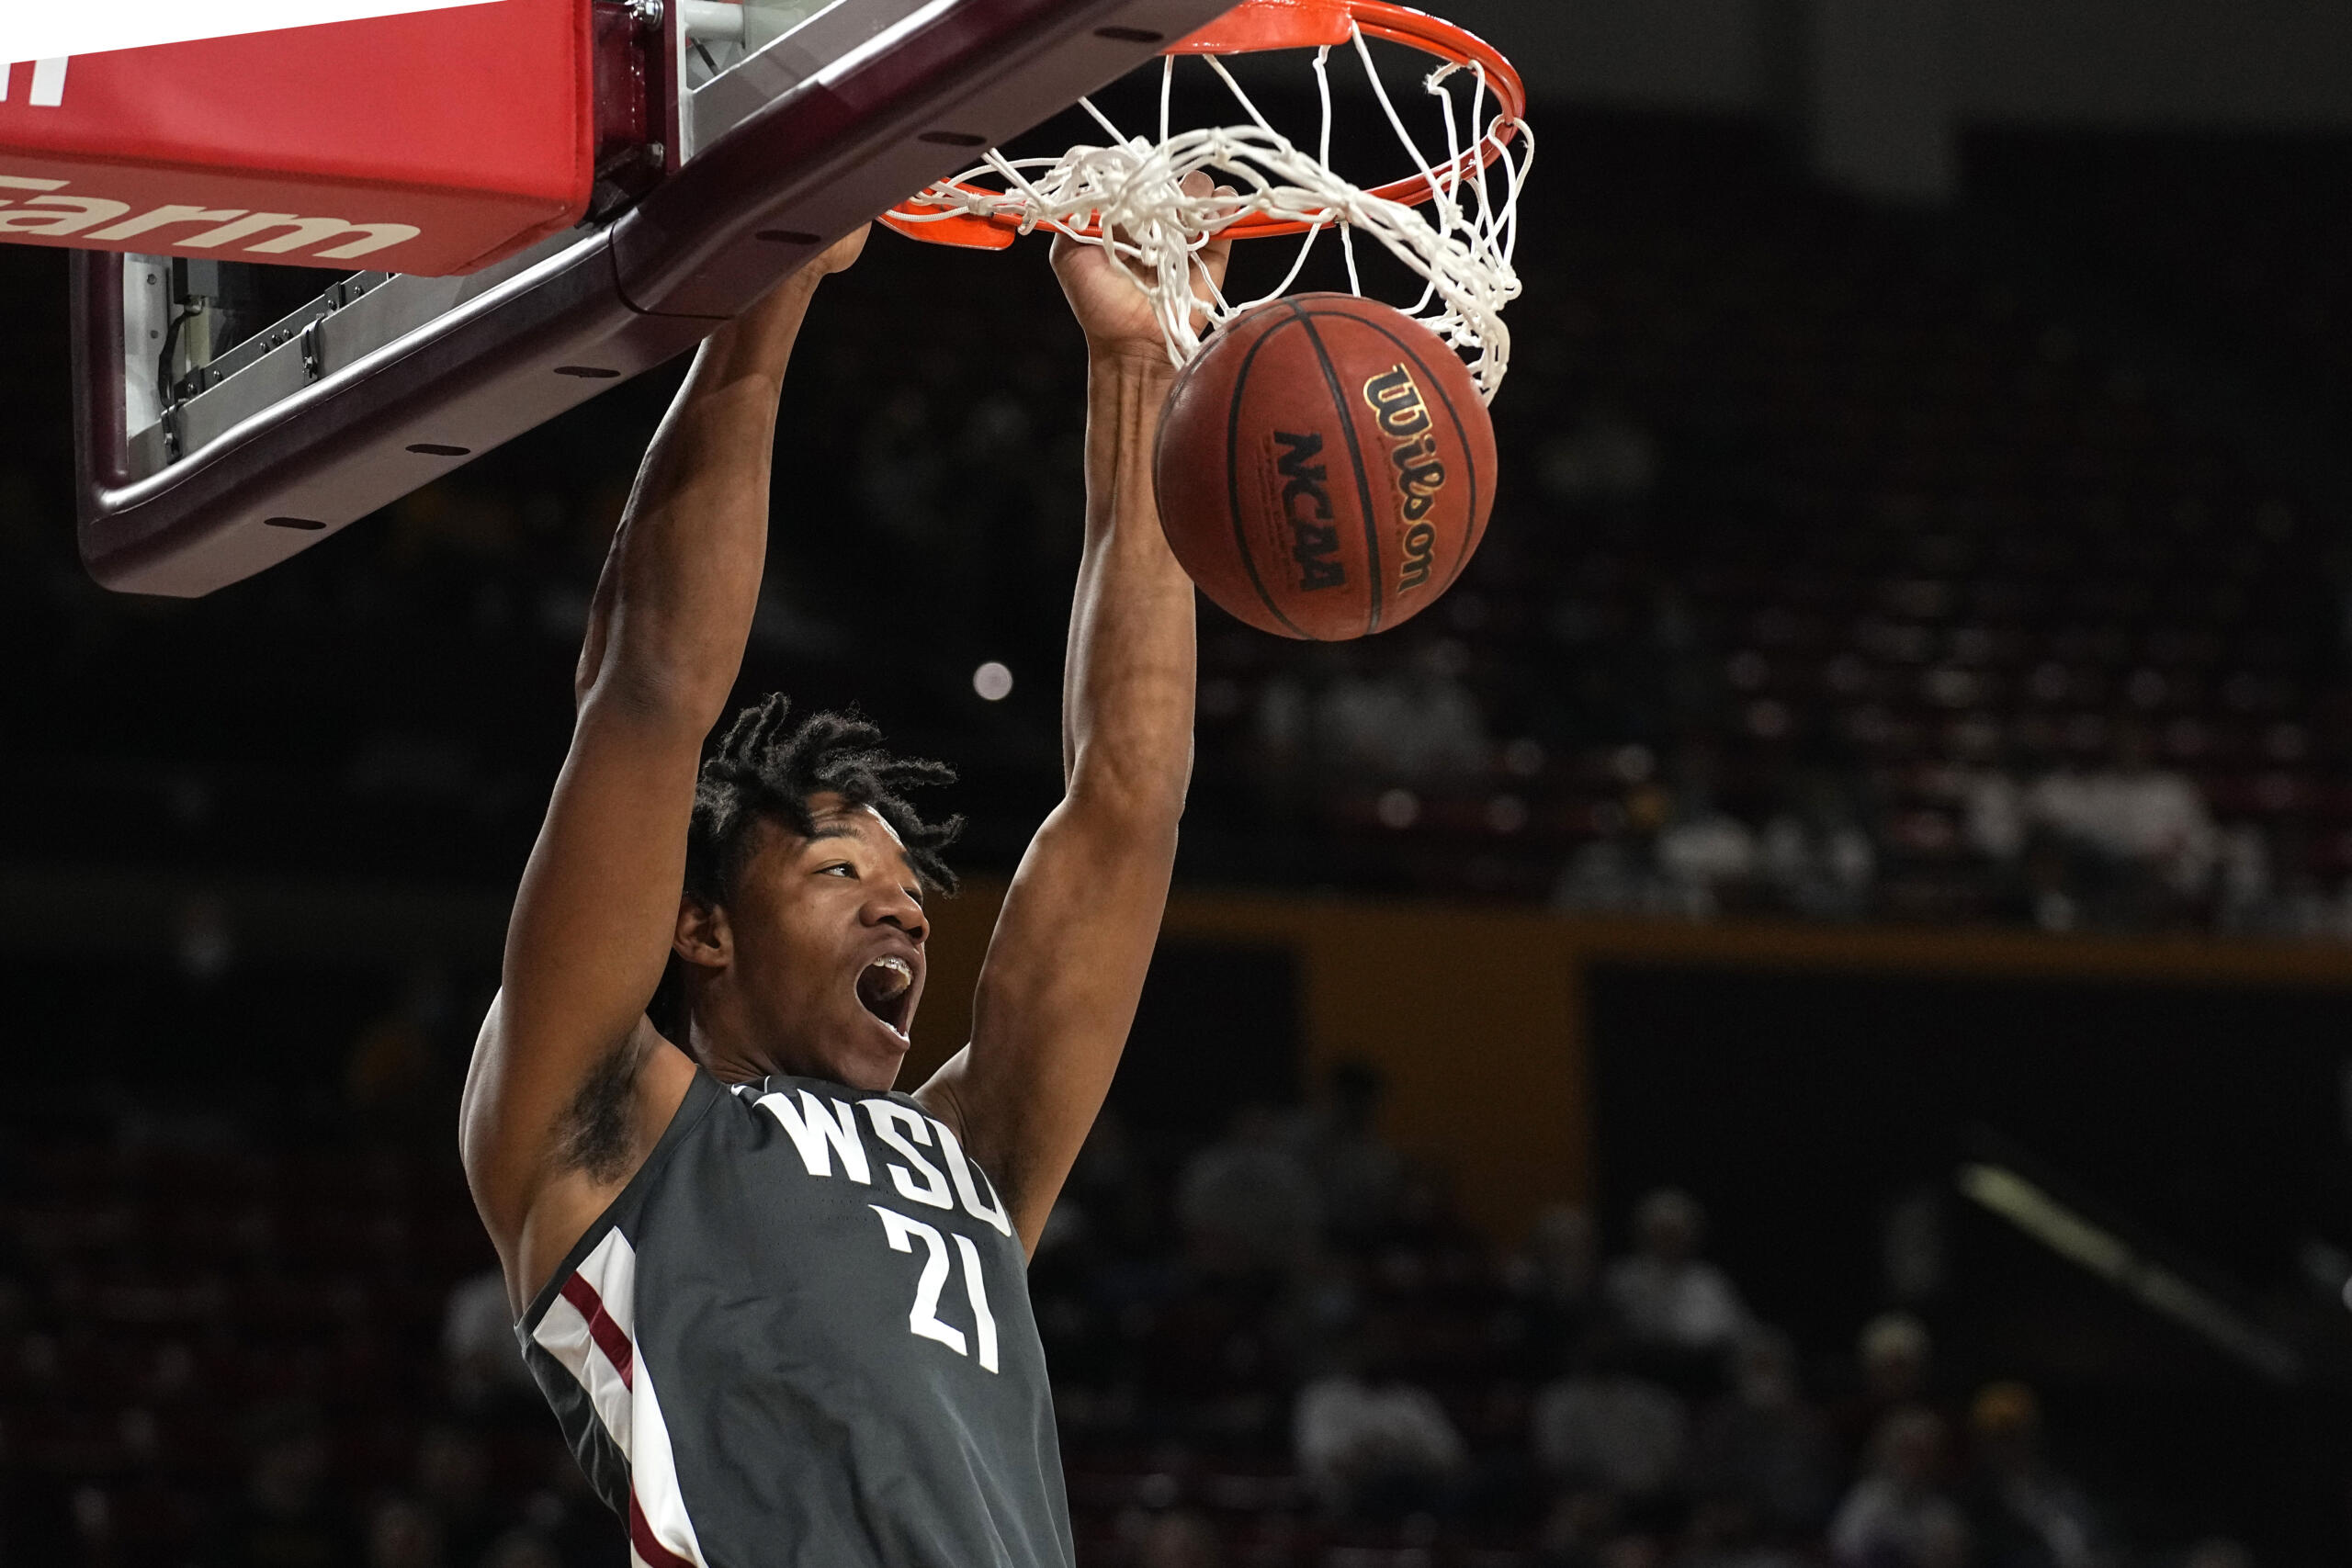 Washington State center Dishon Jackson dunks against Arizona State during the first half of an NCAA college basketball game, Wednesday, Dec. 1, 2021, in Tempe, Ariz.